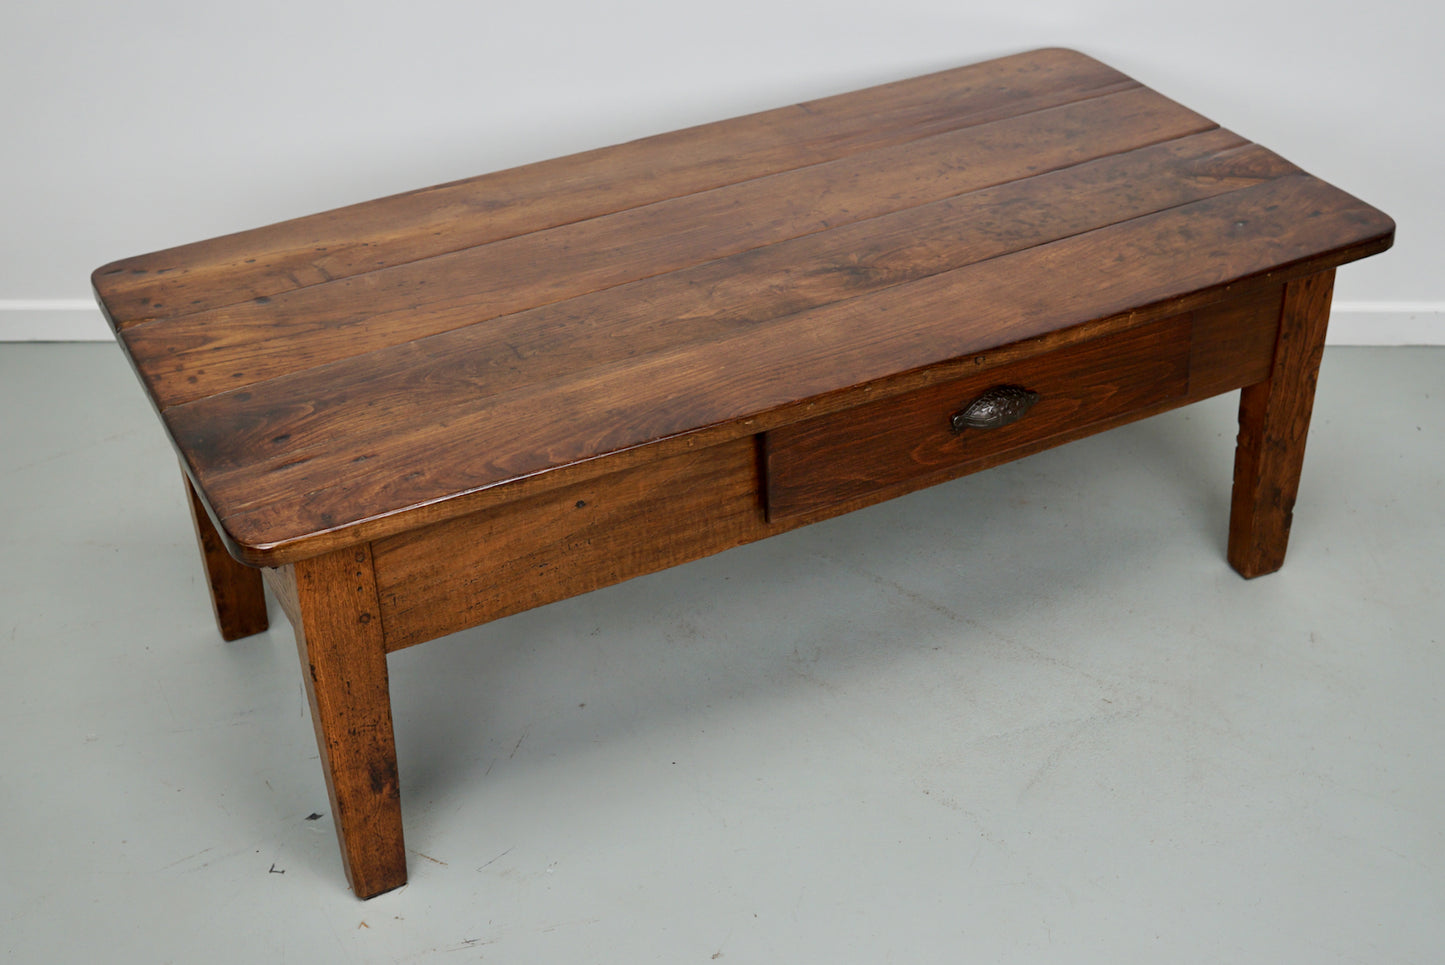 French 19th Century Farmhouse Rustic Chestnut Coffee Table